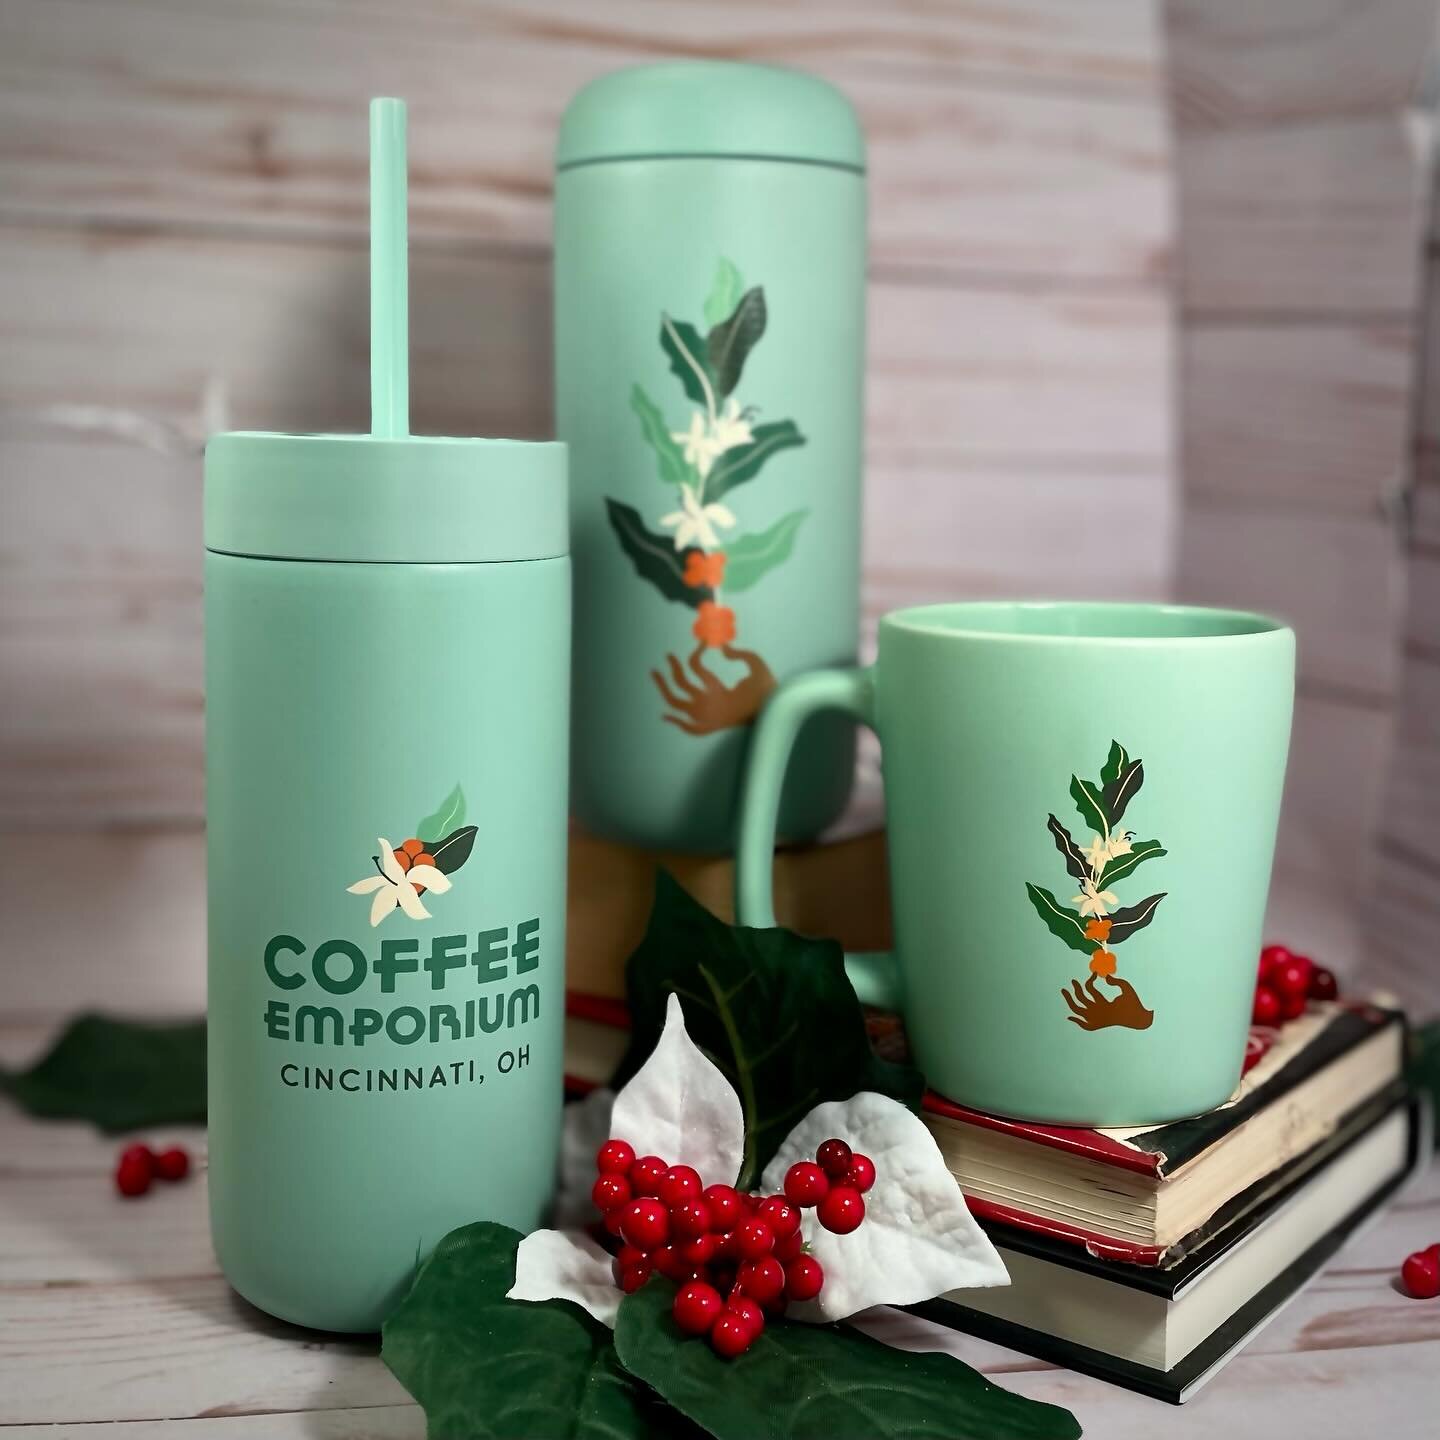 Oh By Gosh by Golly. T&rsquo;is the Season to be jolly and gift some our newest festive drinkware to your loved ones.
Like our rad new series featuring this cute coffee plant design highlighting where this special drink comes from - the humble coffee